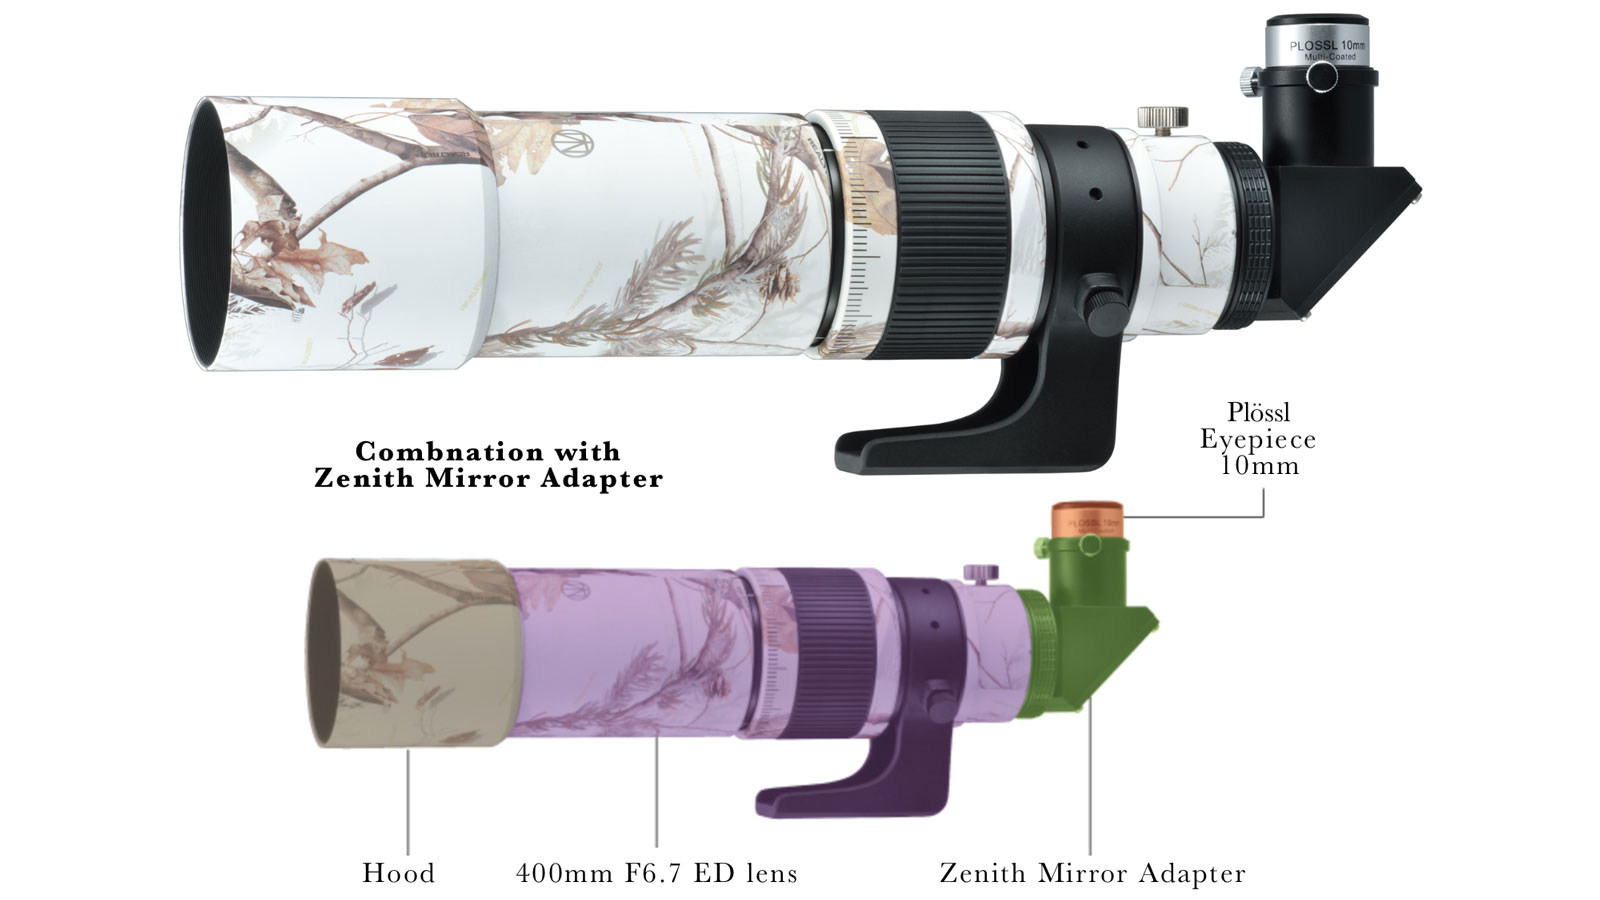 Kenko MILTOL 400mm F6.7 ED Camouflage "Realtree" as kit for astronomic observation